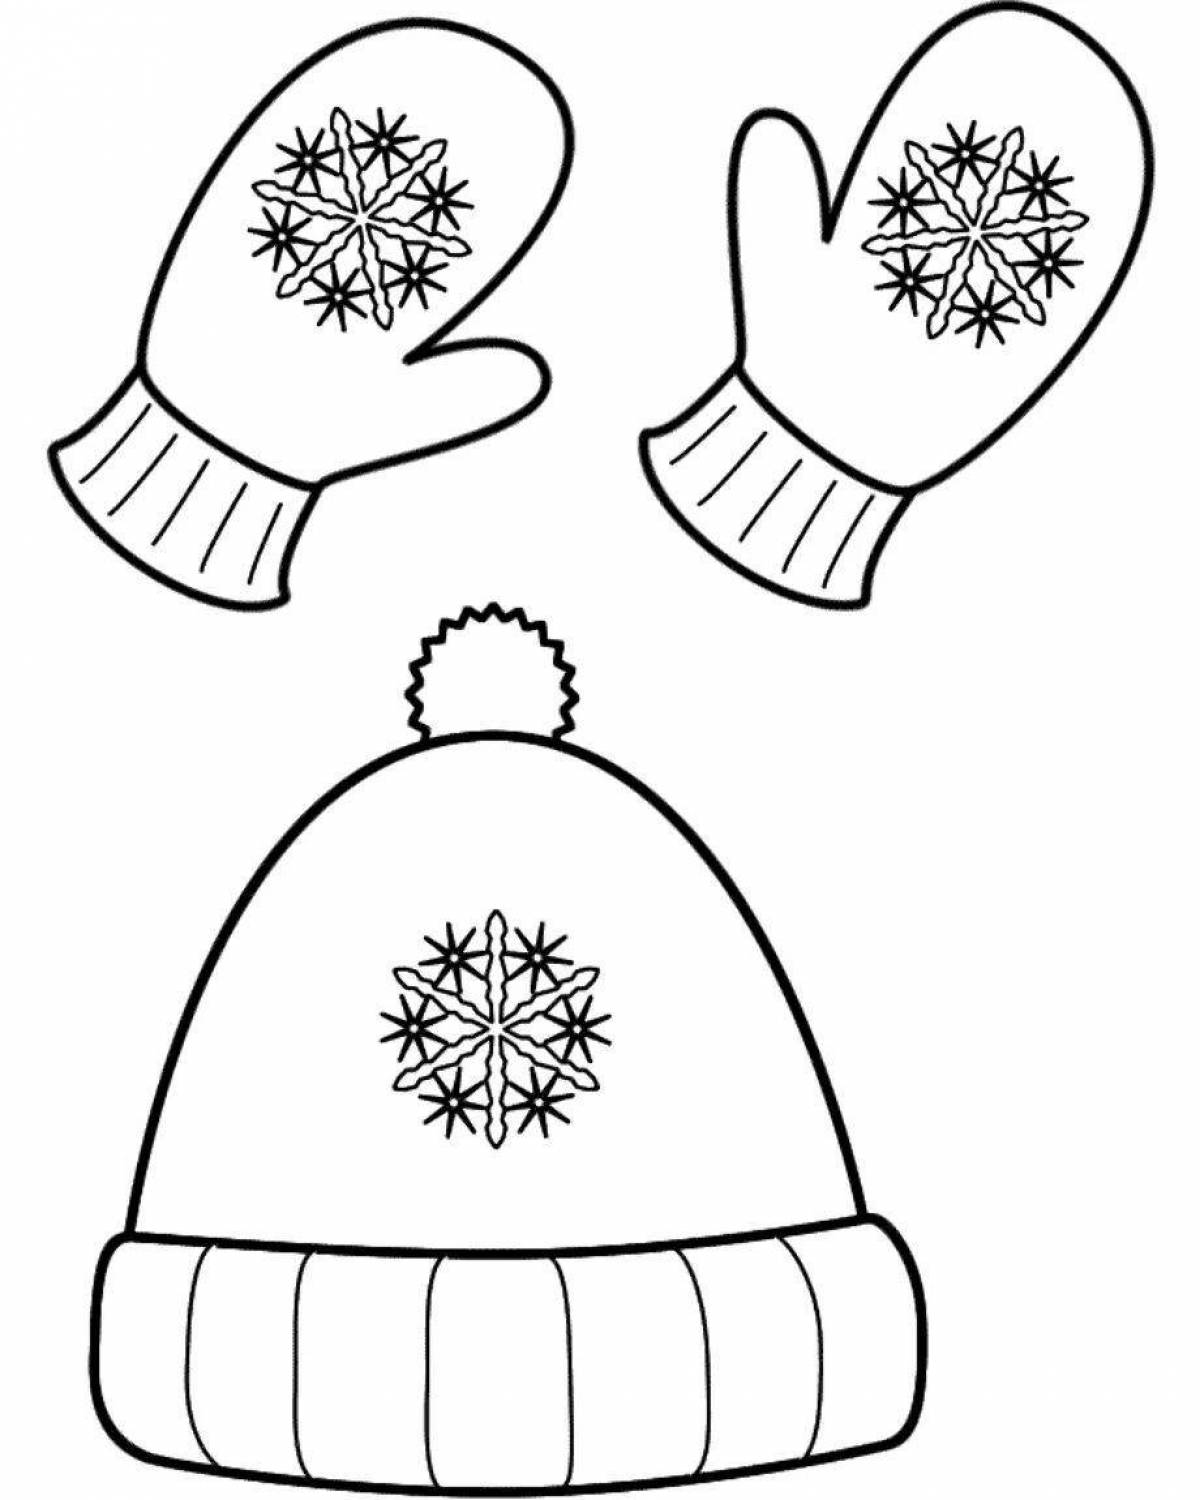 Coloring page adorable kindergarten mittens